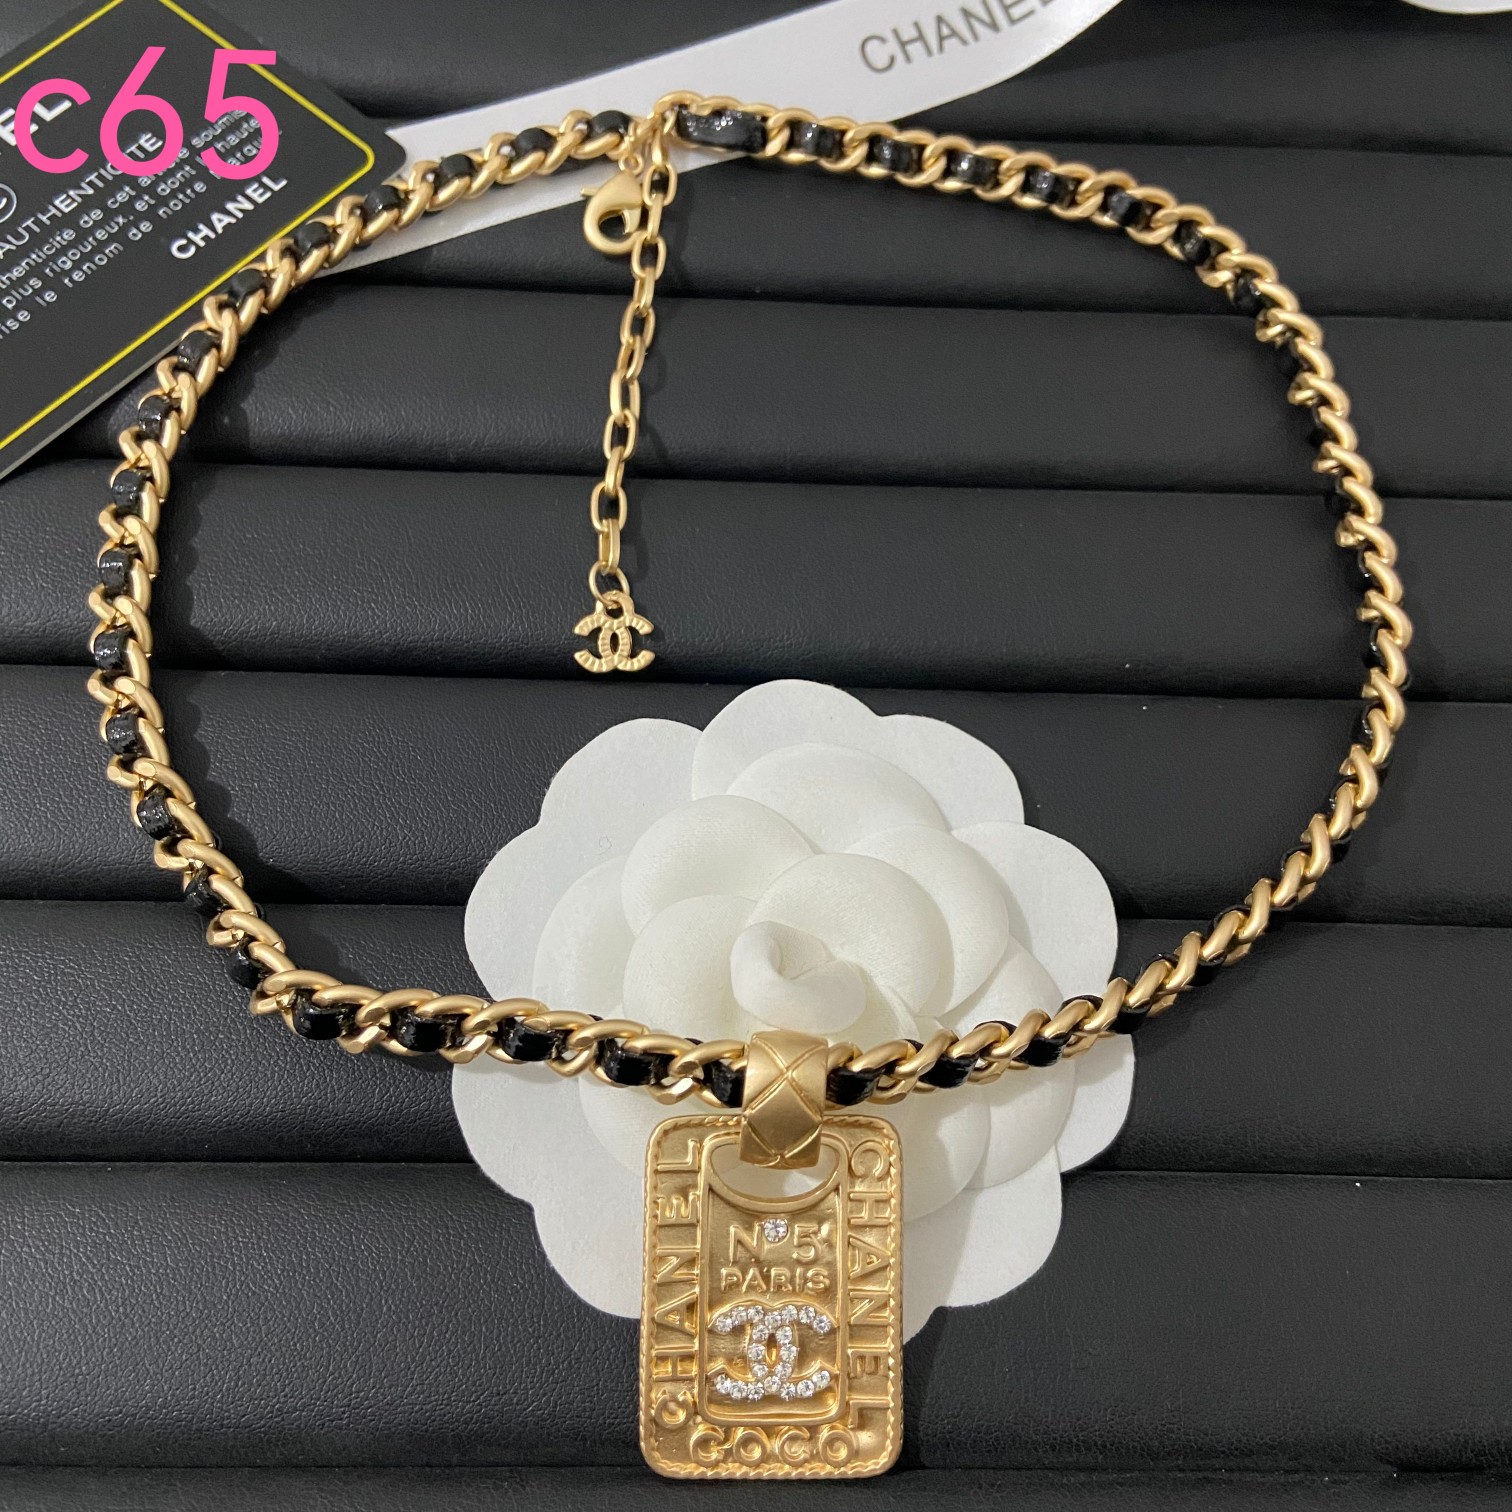 Chanel necklace 106512